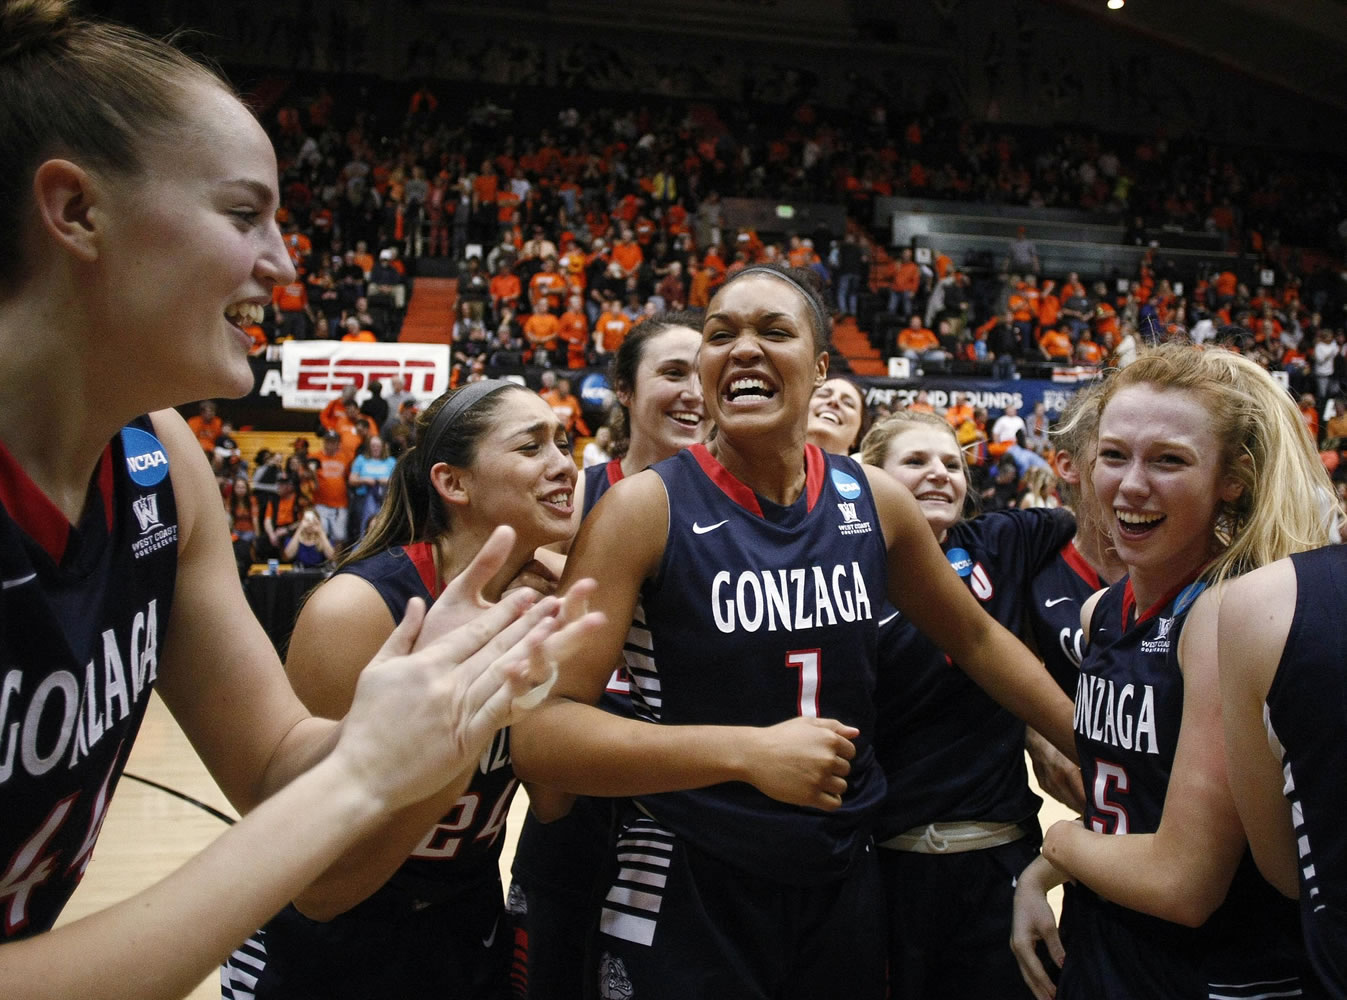 Gonzaga's Shelby Chelsea, Keani Albanez, Chelsea Waters and Georgia Stirton, from left, celebrate after Gonzaga defeated Oregon State 76-64 in the second round of the NCAA tournament in Corvallis, Ore., Sunday, March 22, 2015.